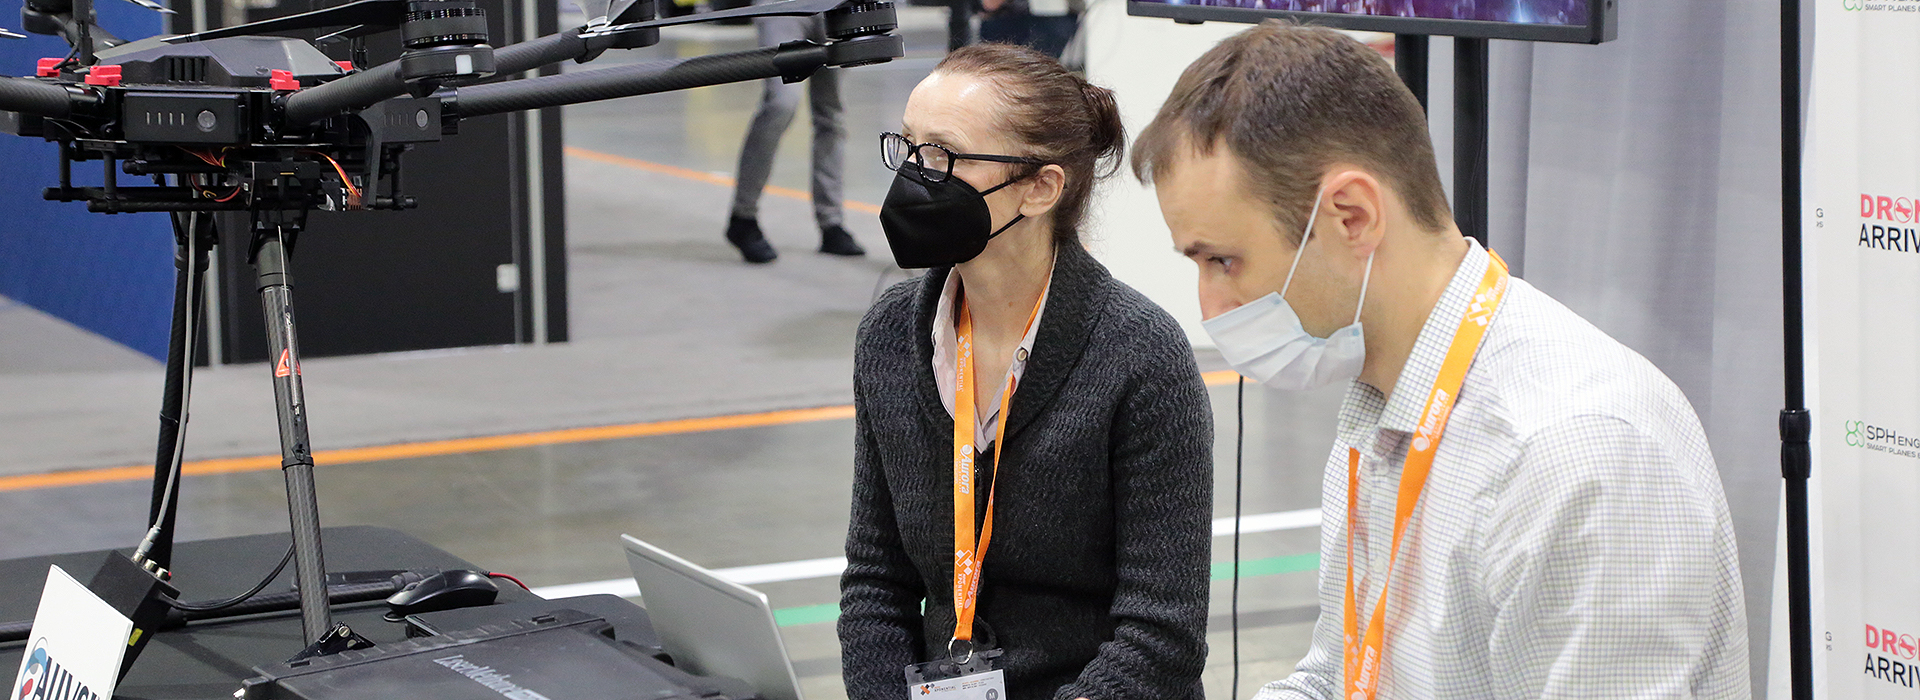 Drone Arrival Helen Pukszta and SPH Engineering Alexei Yankelevich at AUVSI Xponential 21